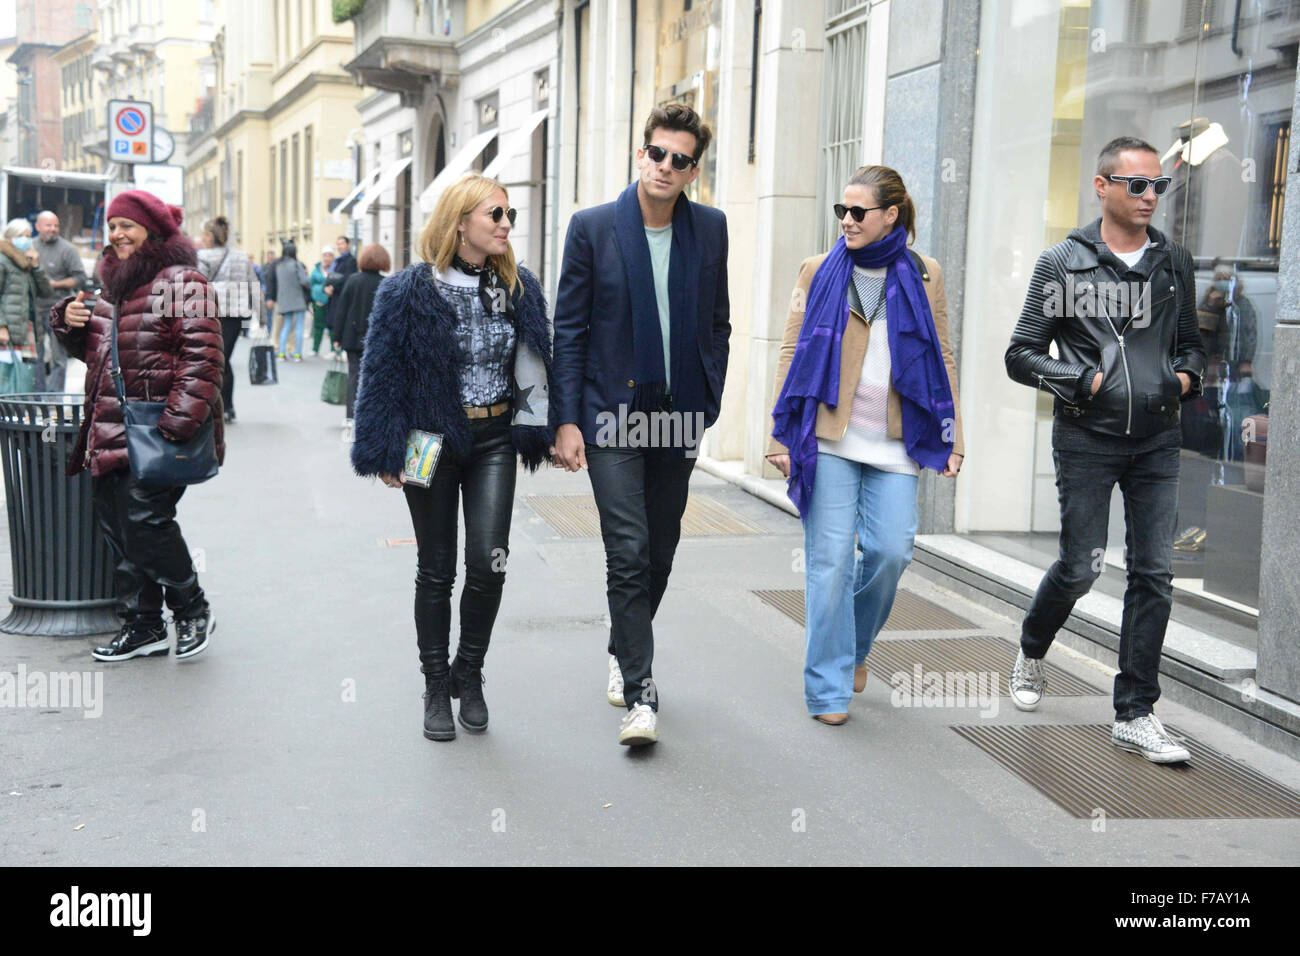 Mark Ronson and his wife Josephine de la Baume hold hands as they leave Il Salumaio restaurant after lunch with friends Pietro Tavallini, Francesca Versace for a shopping spree at Versace and Brioni  Featuring: View, Mark Ronson, Josephine de la Baume, Pi Stock Photo